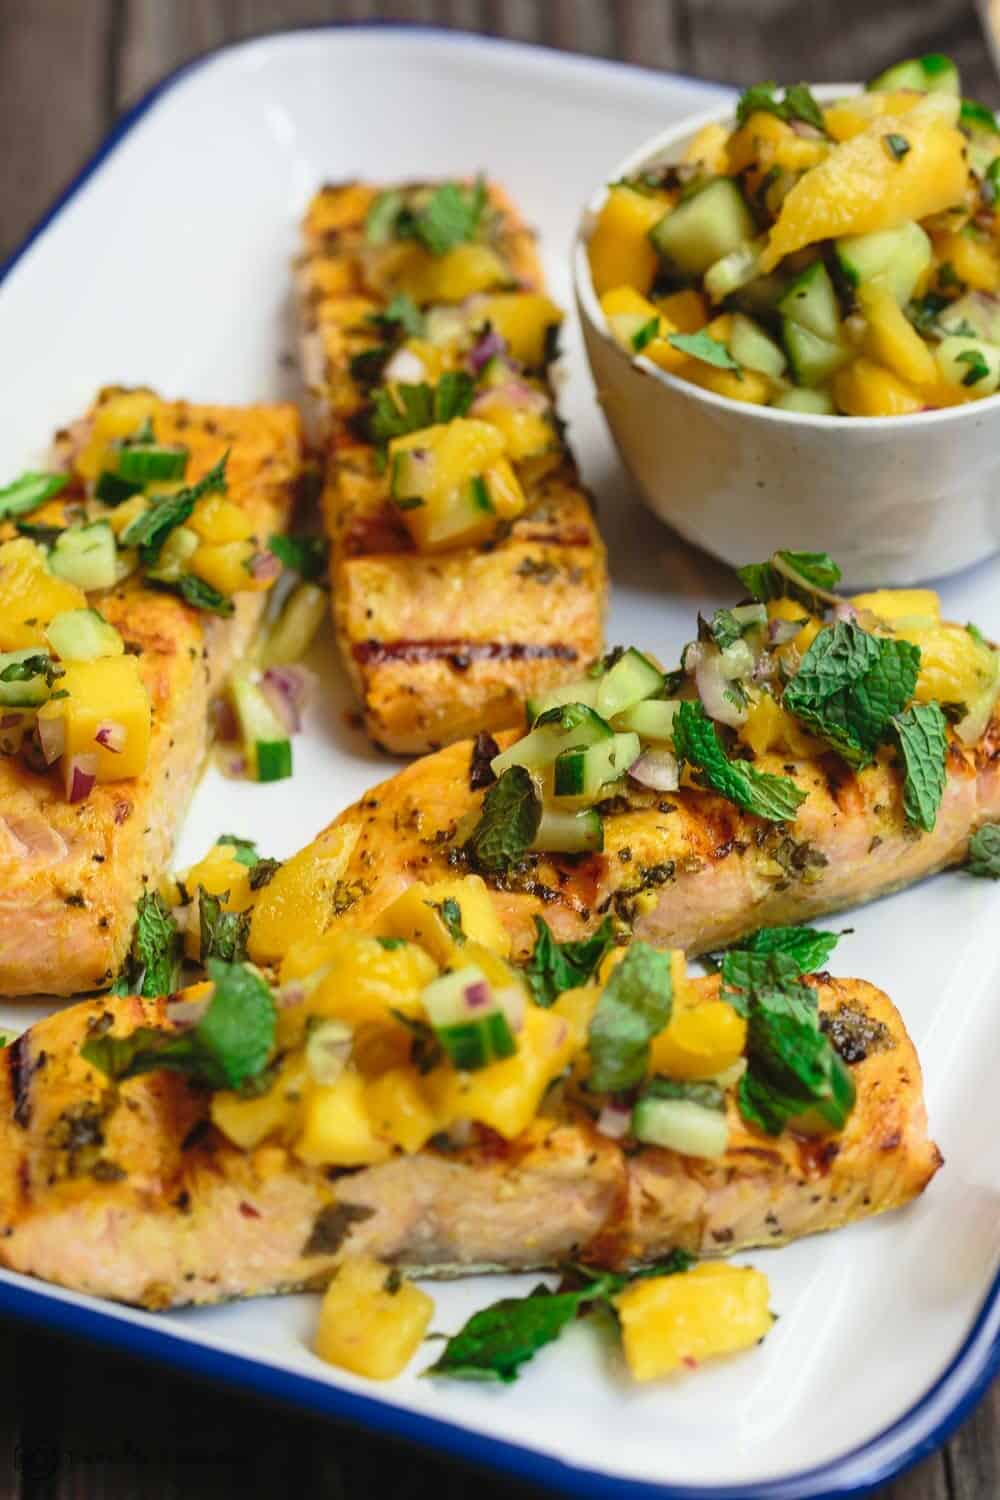 salmon pieces cooked on the grill and topped with mango salsal